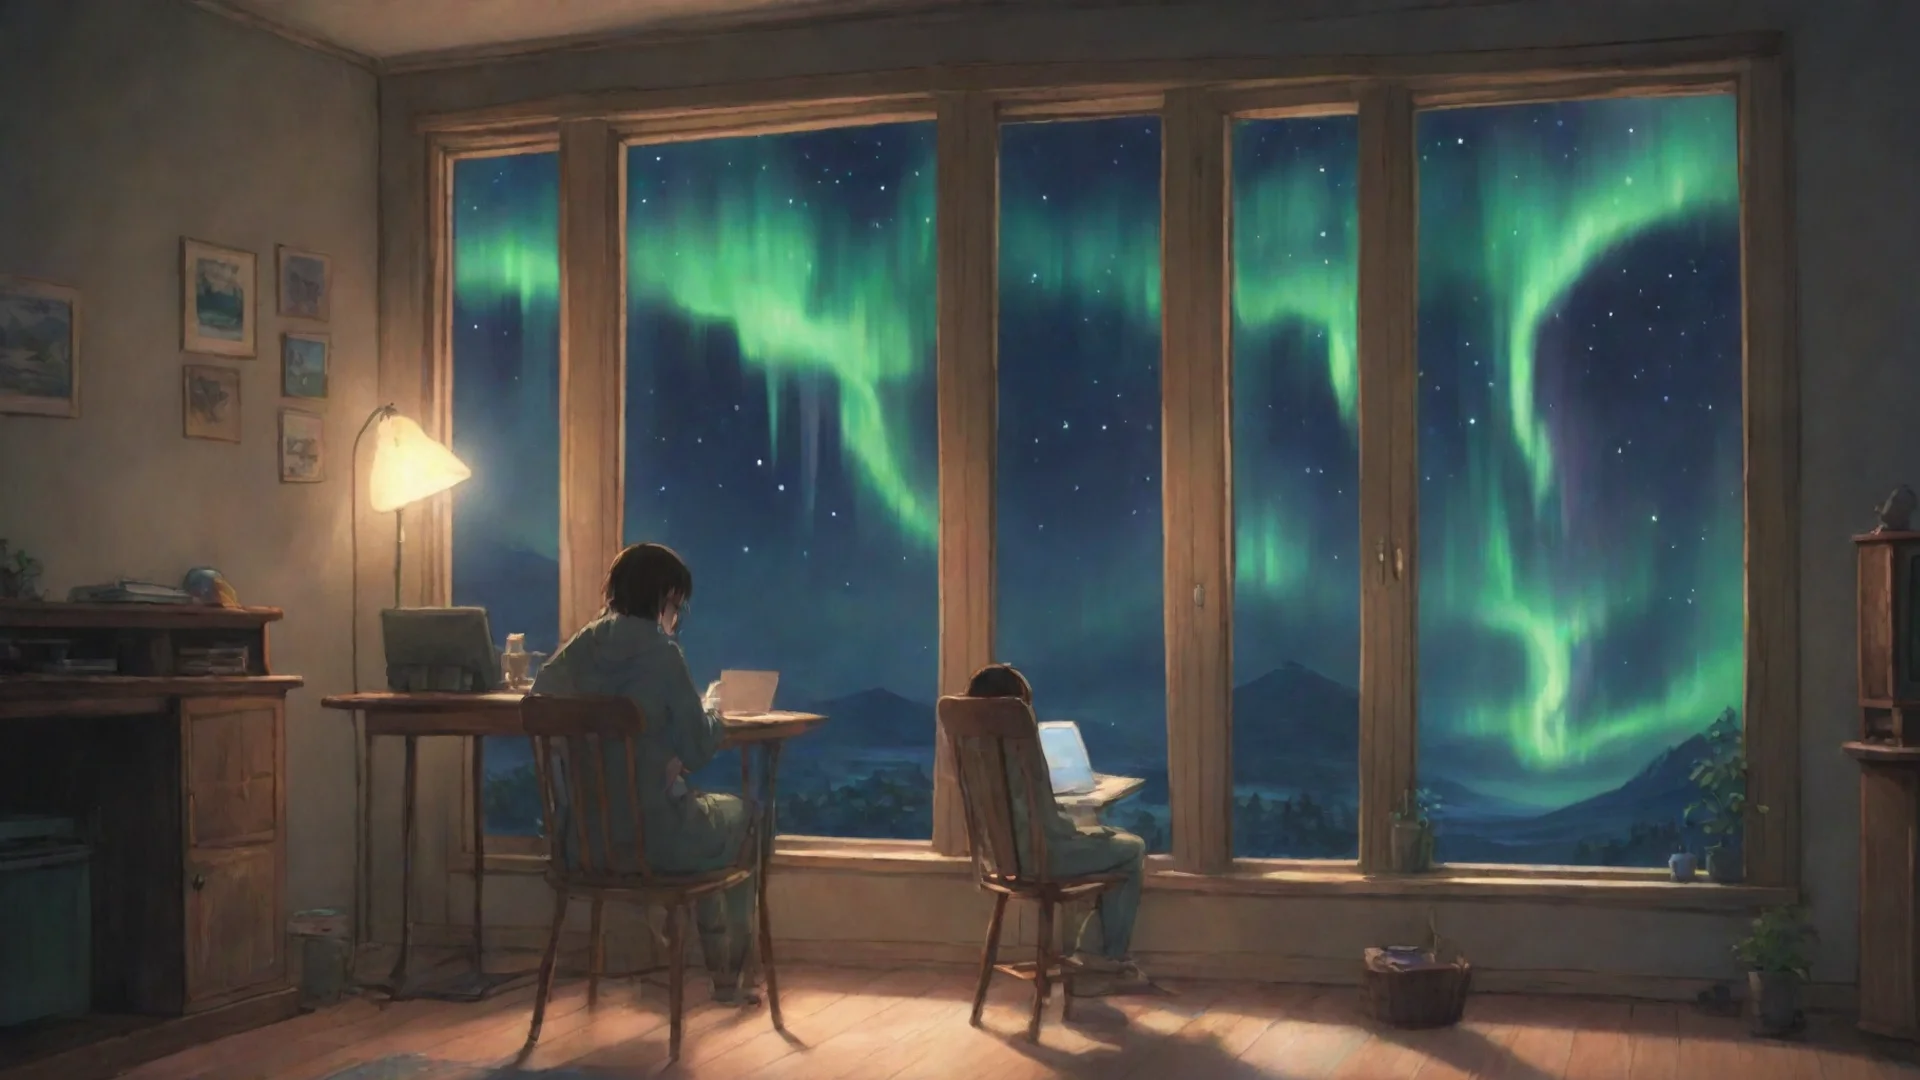 amazing can you draw of a girl sitting on a chair and using a computer inside of his house and the window is like northern lights in studio ghibli art style awesome portrait 2 hdwidescreen